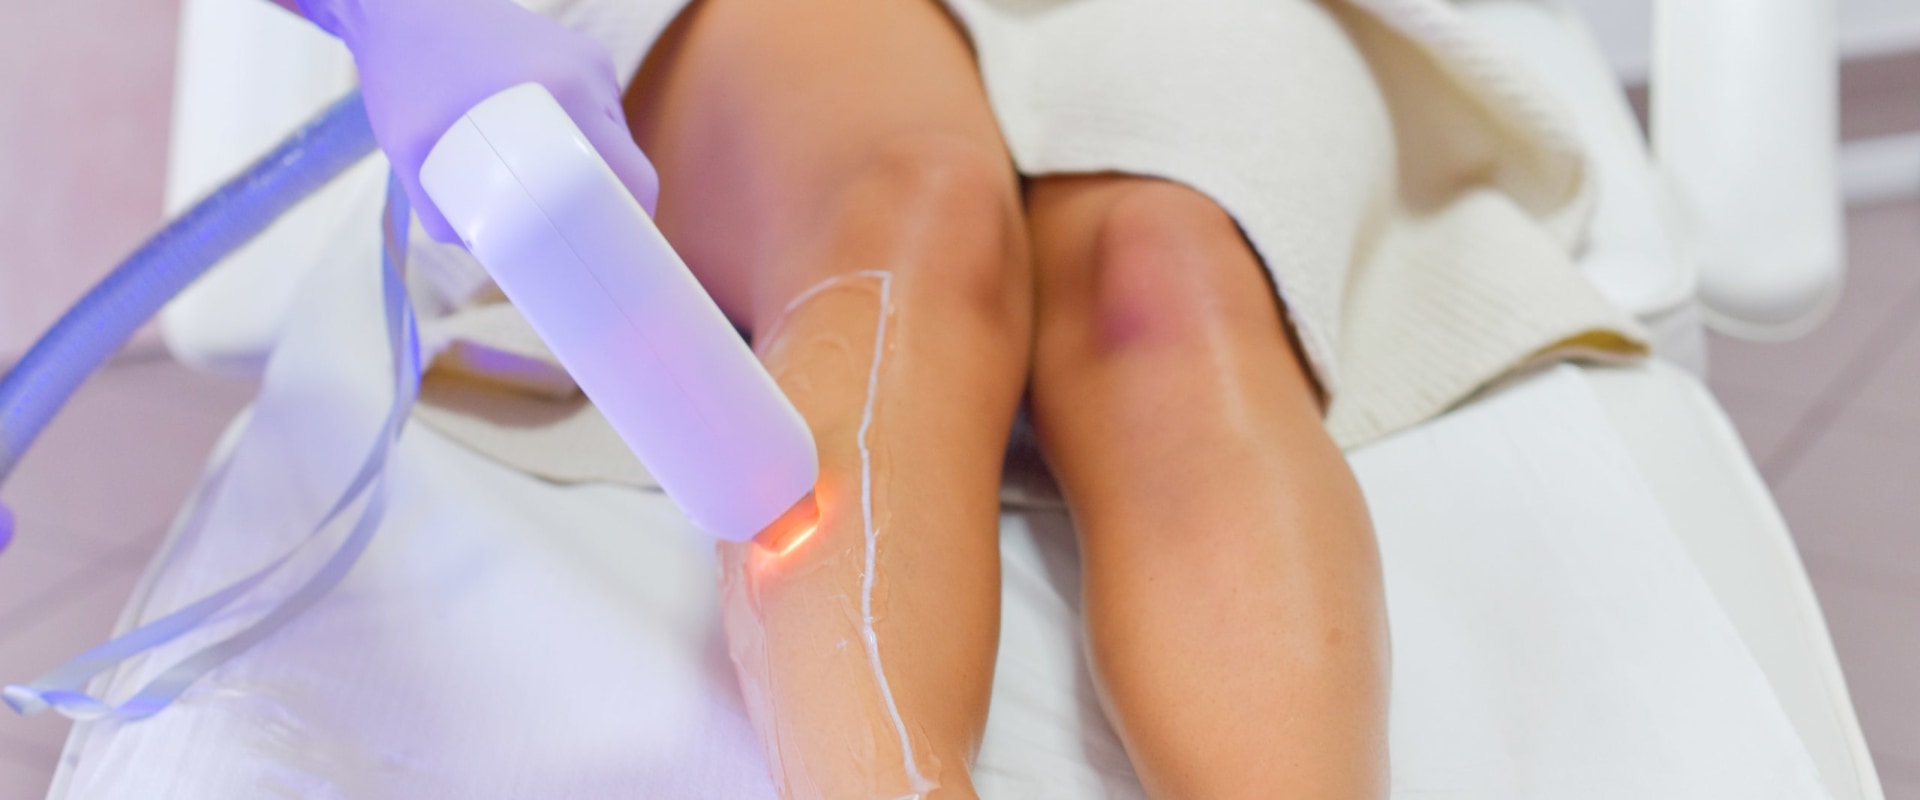 Say Goodbye to Unwanted Hair with Laser Hair Removal